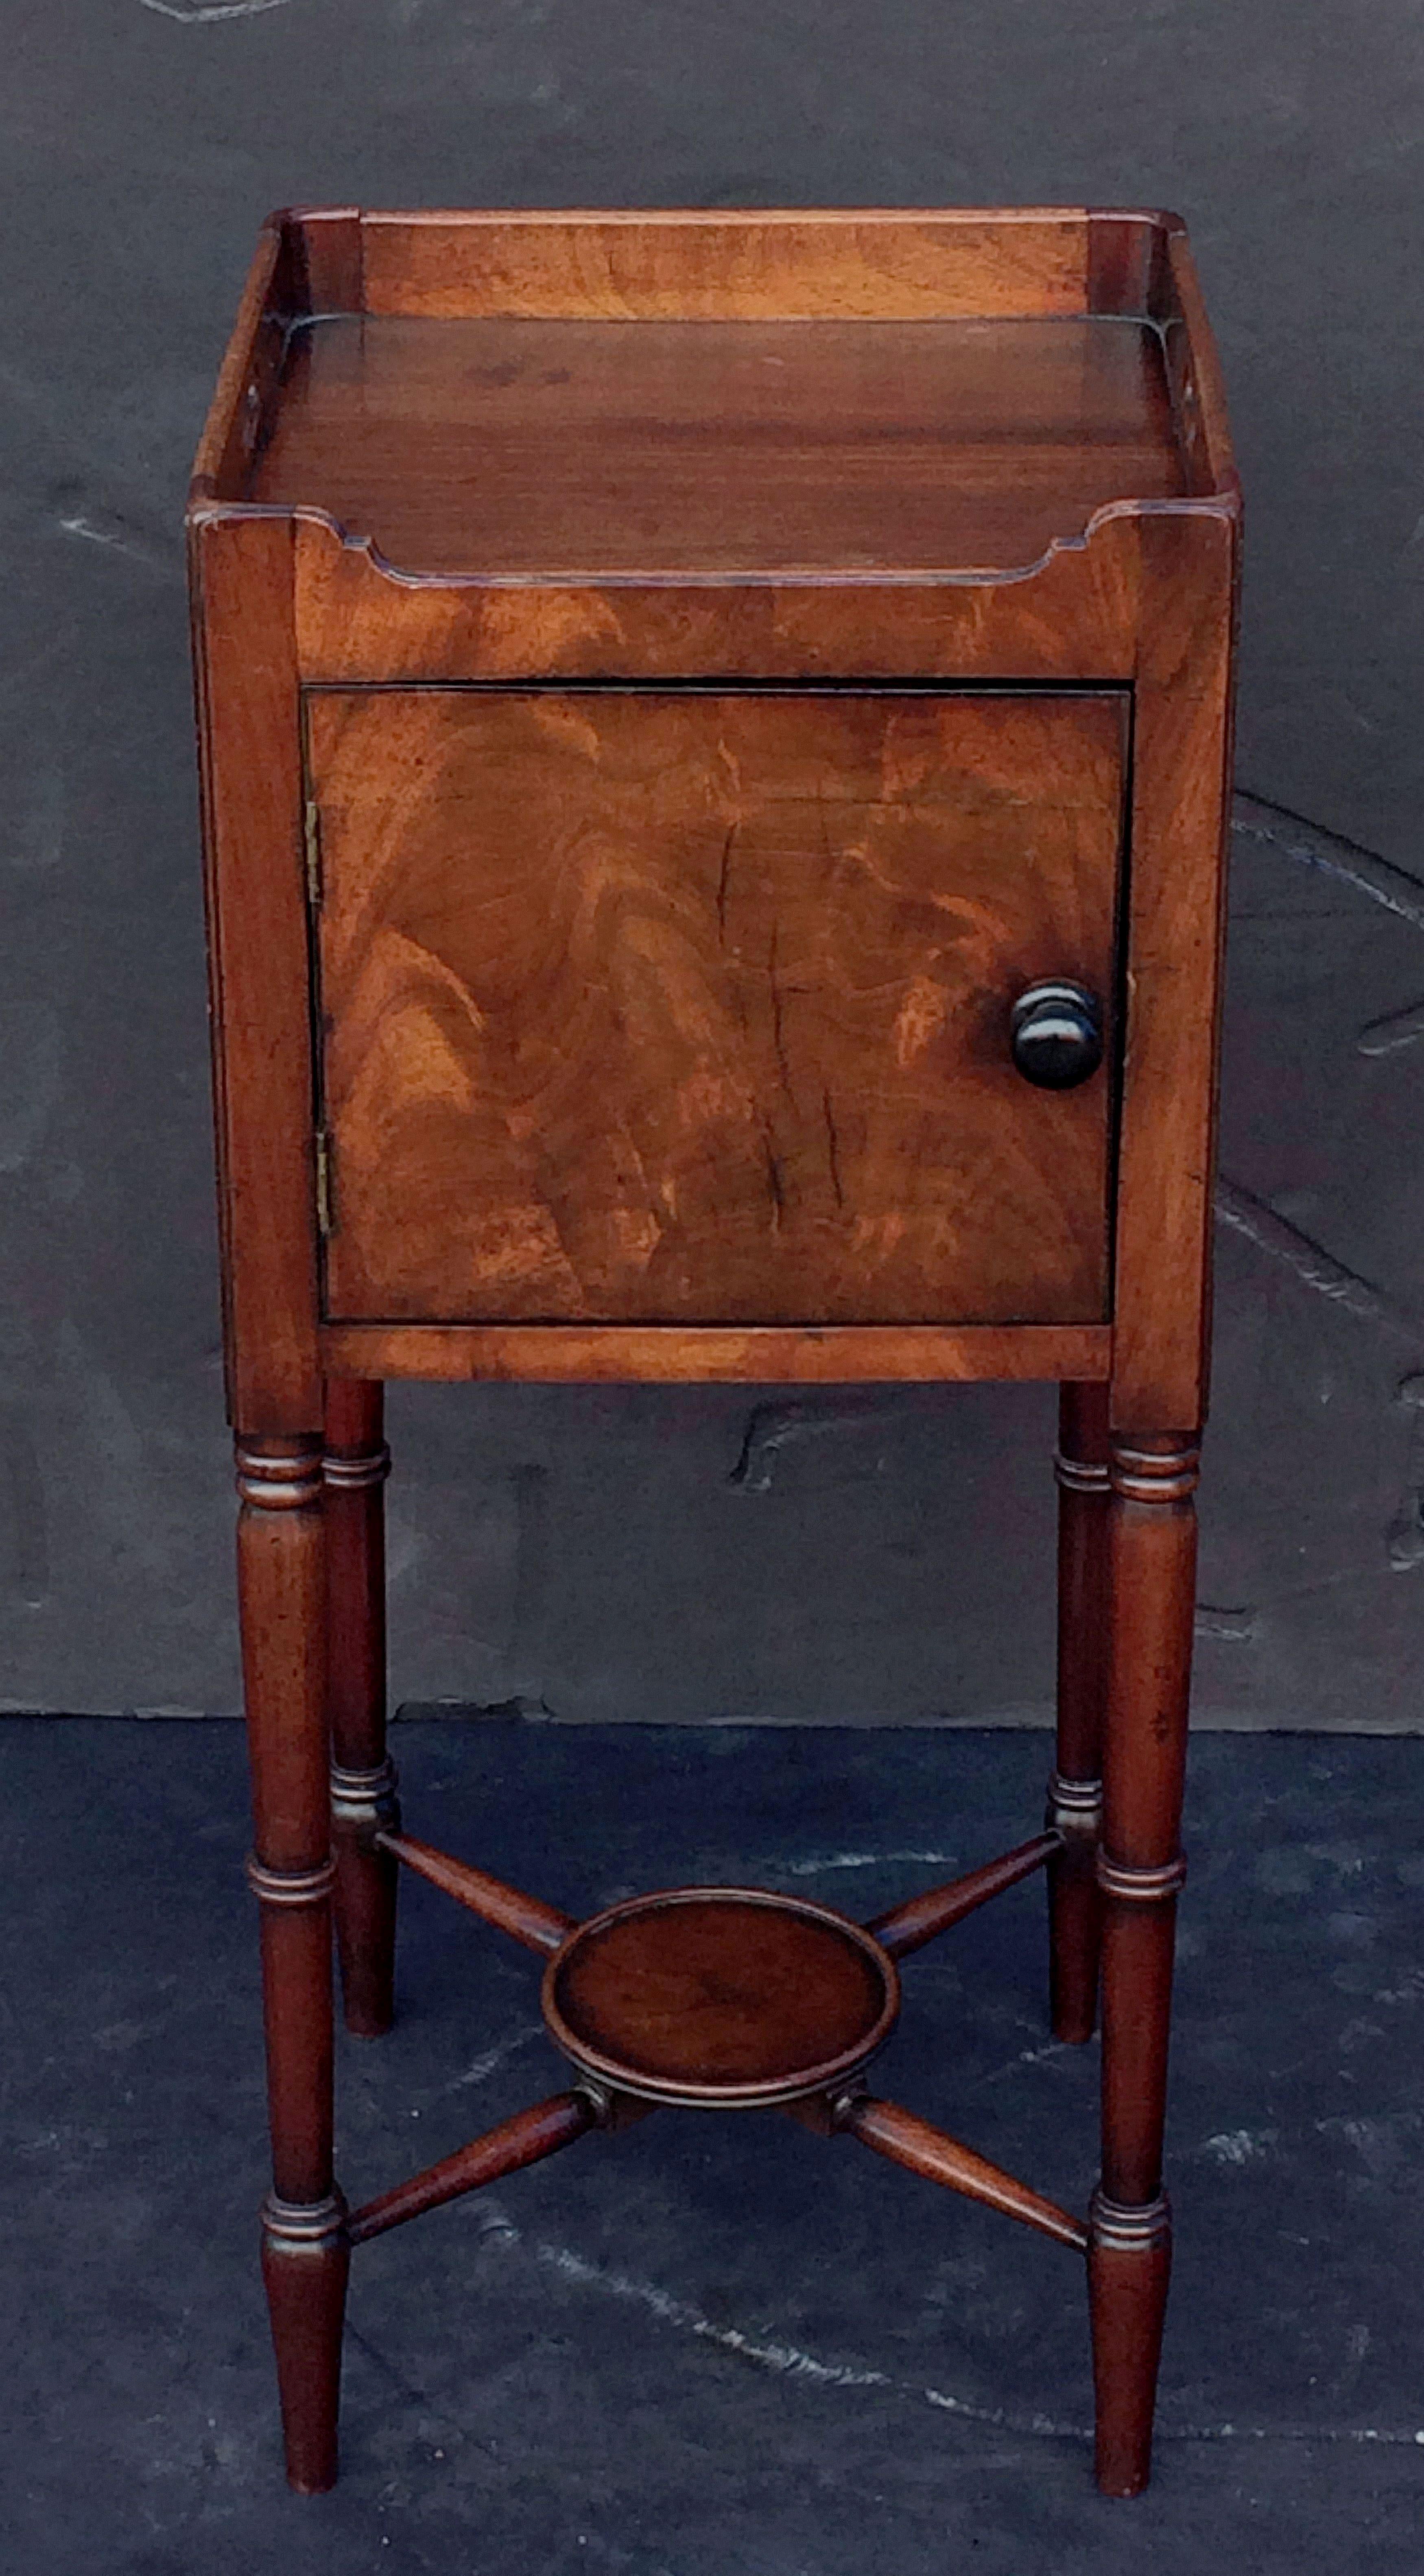 A handsome English nightstand or end (side) table of mahogany, from the William IV era, with molded top with gallery, over a cupboard frieze with door, set upon four turned legs with a stretcher support.

Dimensions: H 33 inches x W 14 1/4 inches